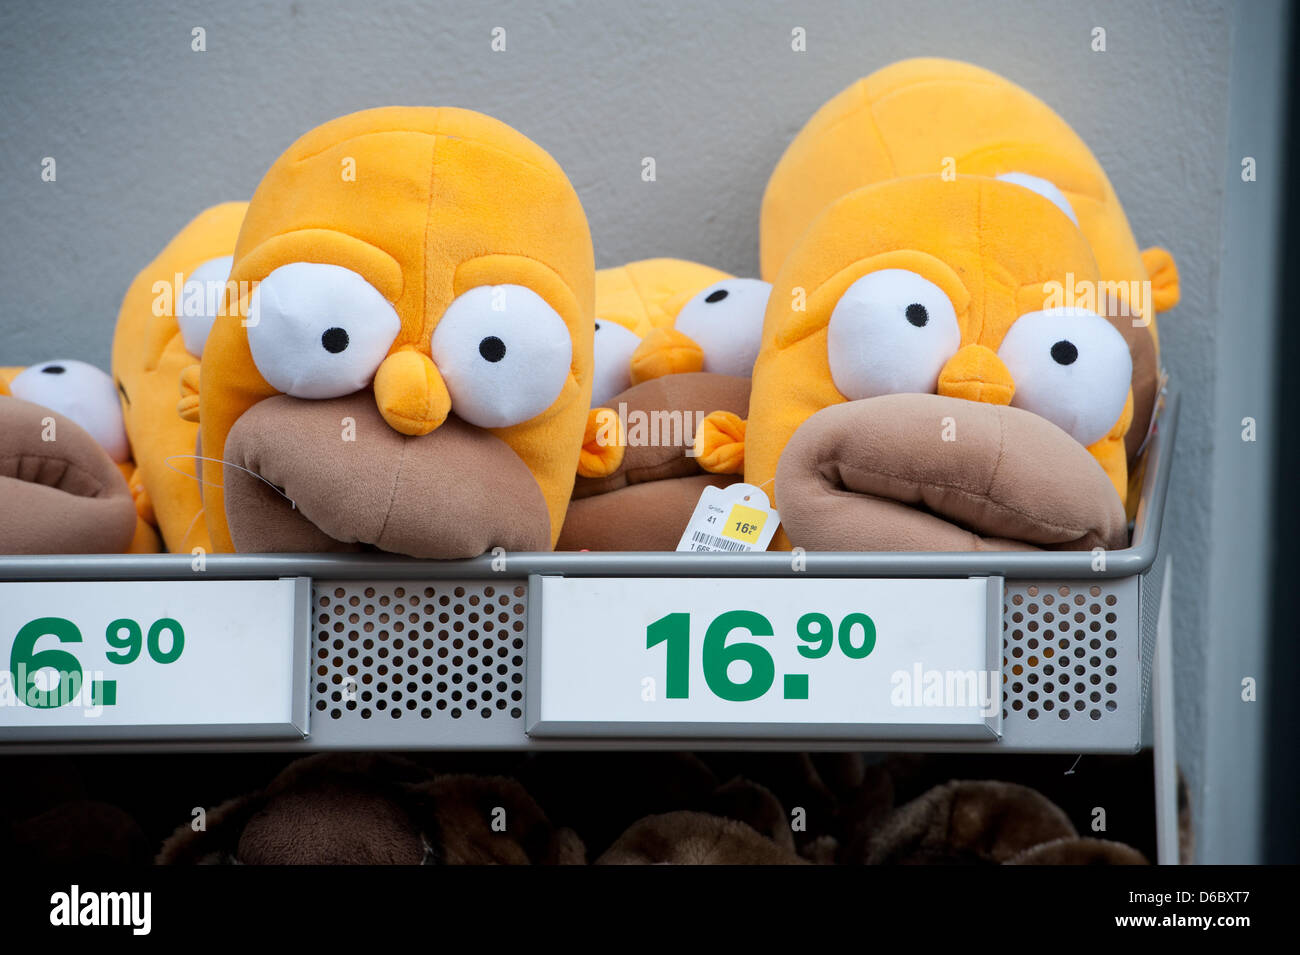 Slippers designed as head of comic figure 'Homer Simpson' are on display at  a store in Stalsund, Germany, 04 January 2012. Photo: Stefan Sauer Stock  Photo - Alamy